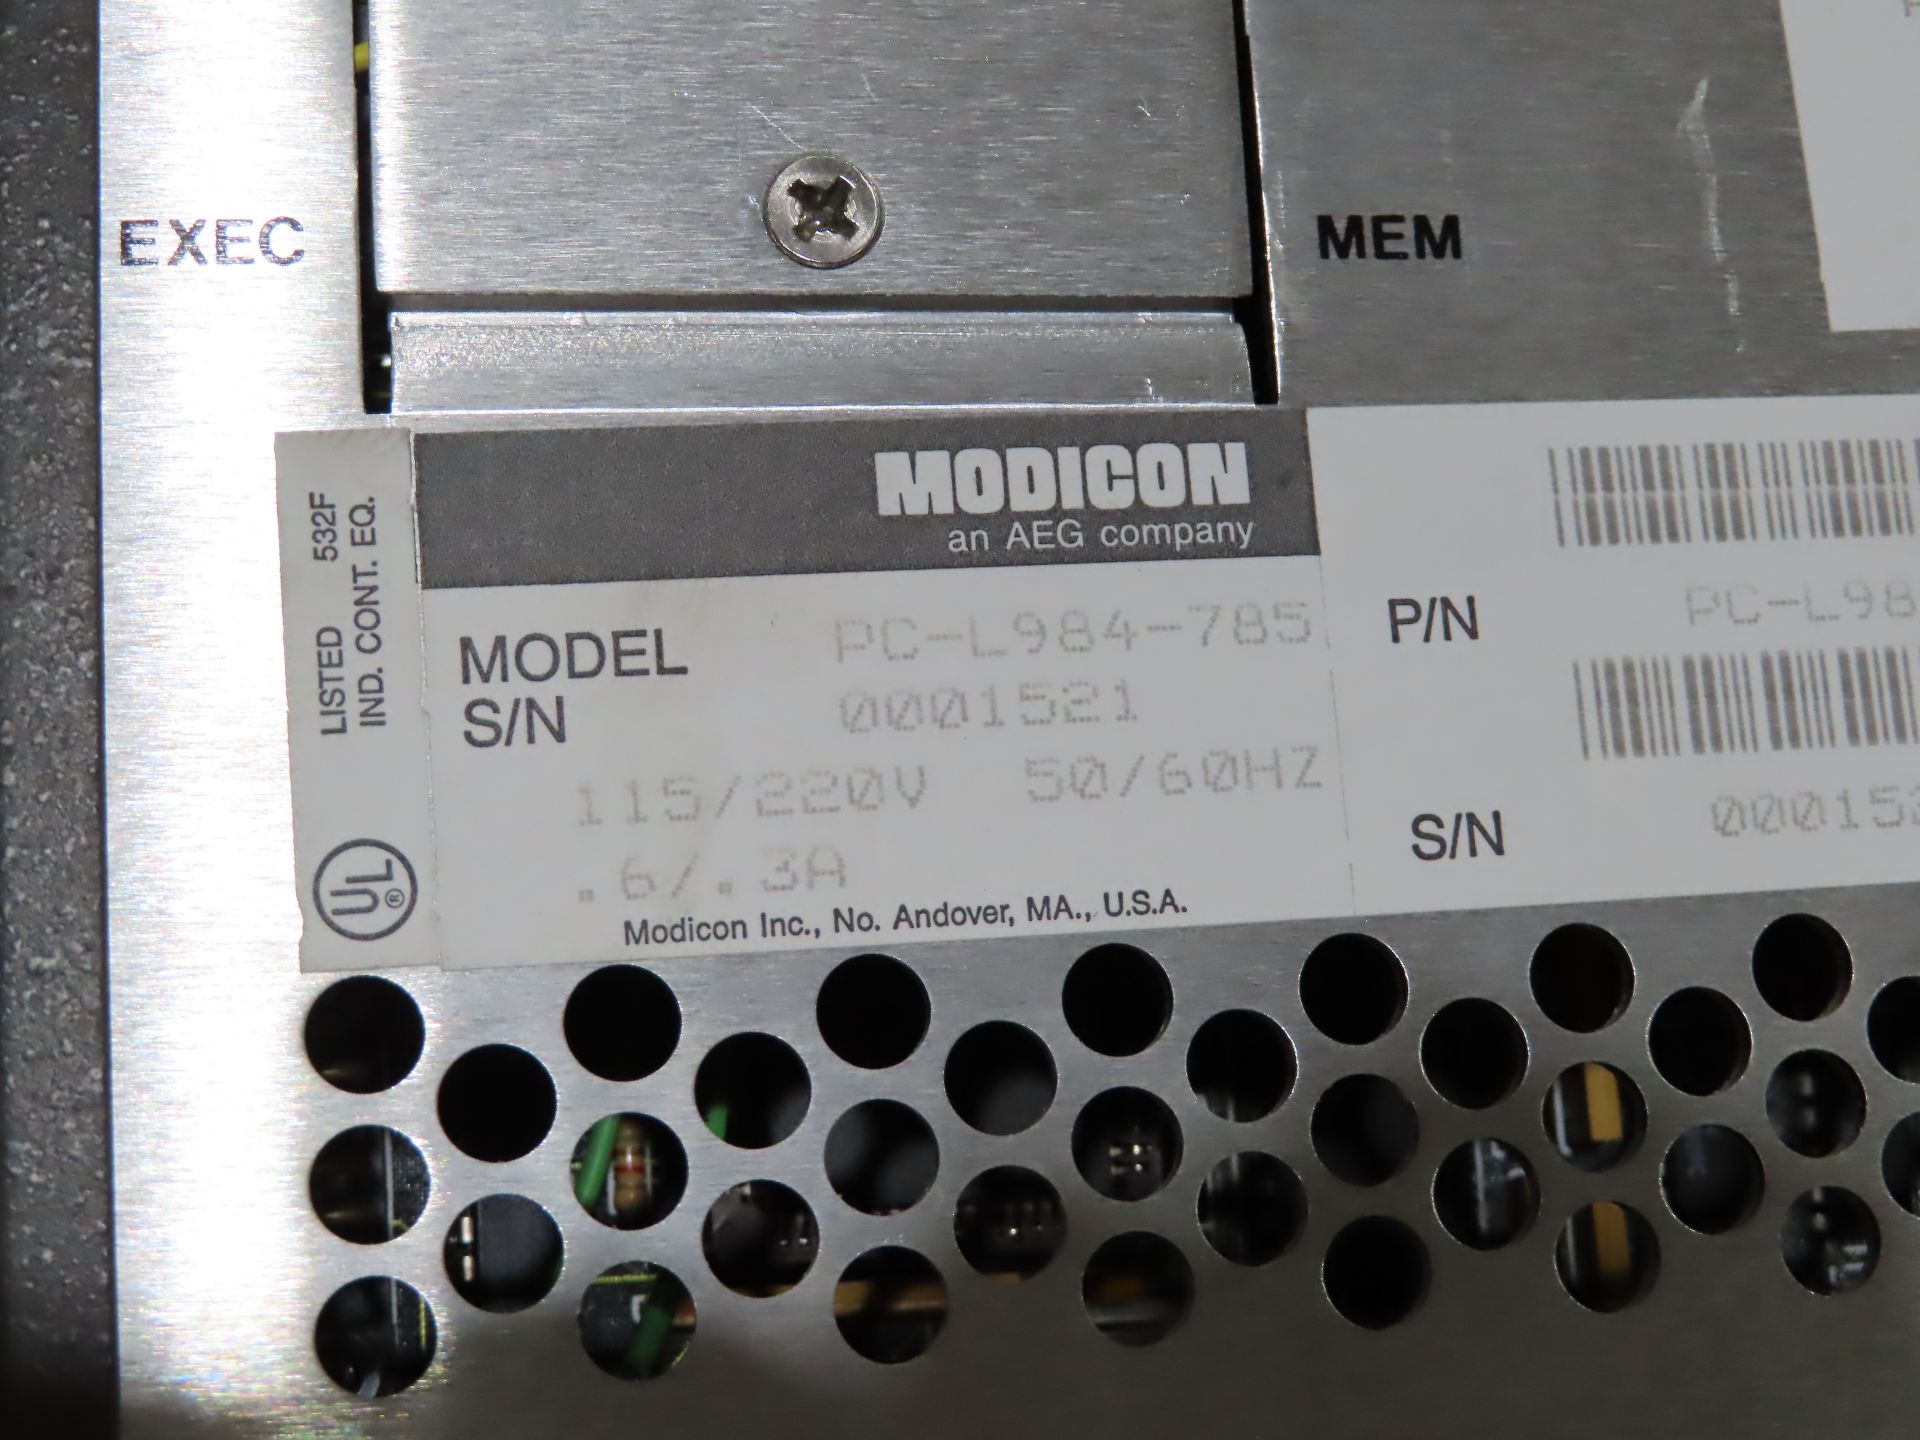 AEG modicon model PC-L984-785, as always, with Brolyn LLC auctions, all lots can be picked up from - Image 2 of 2